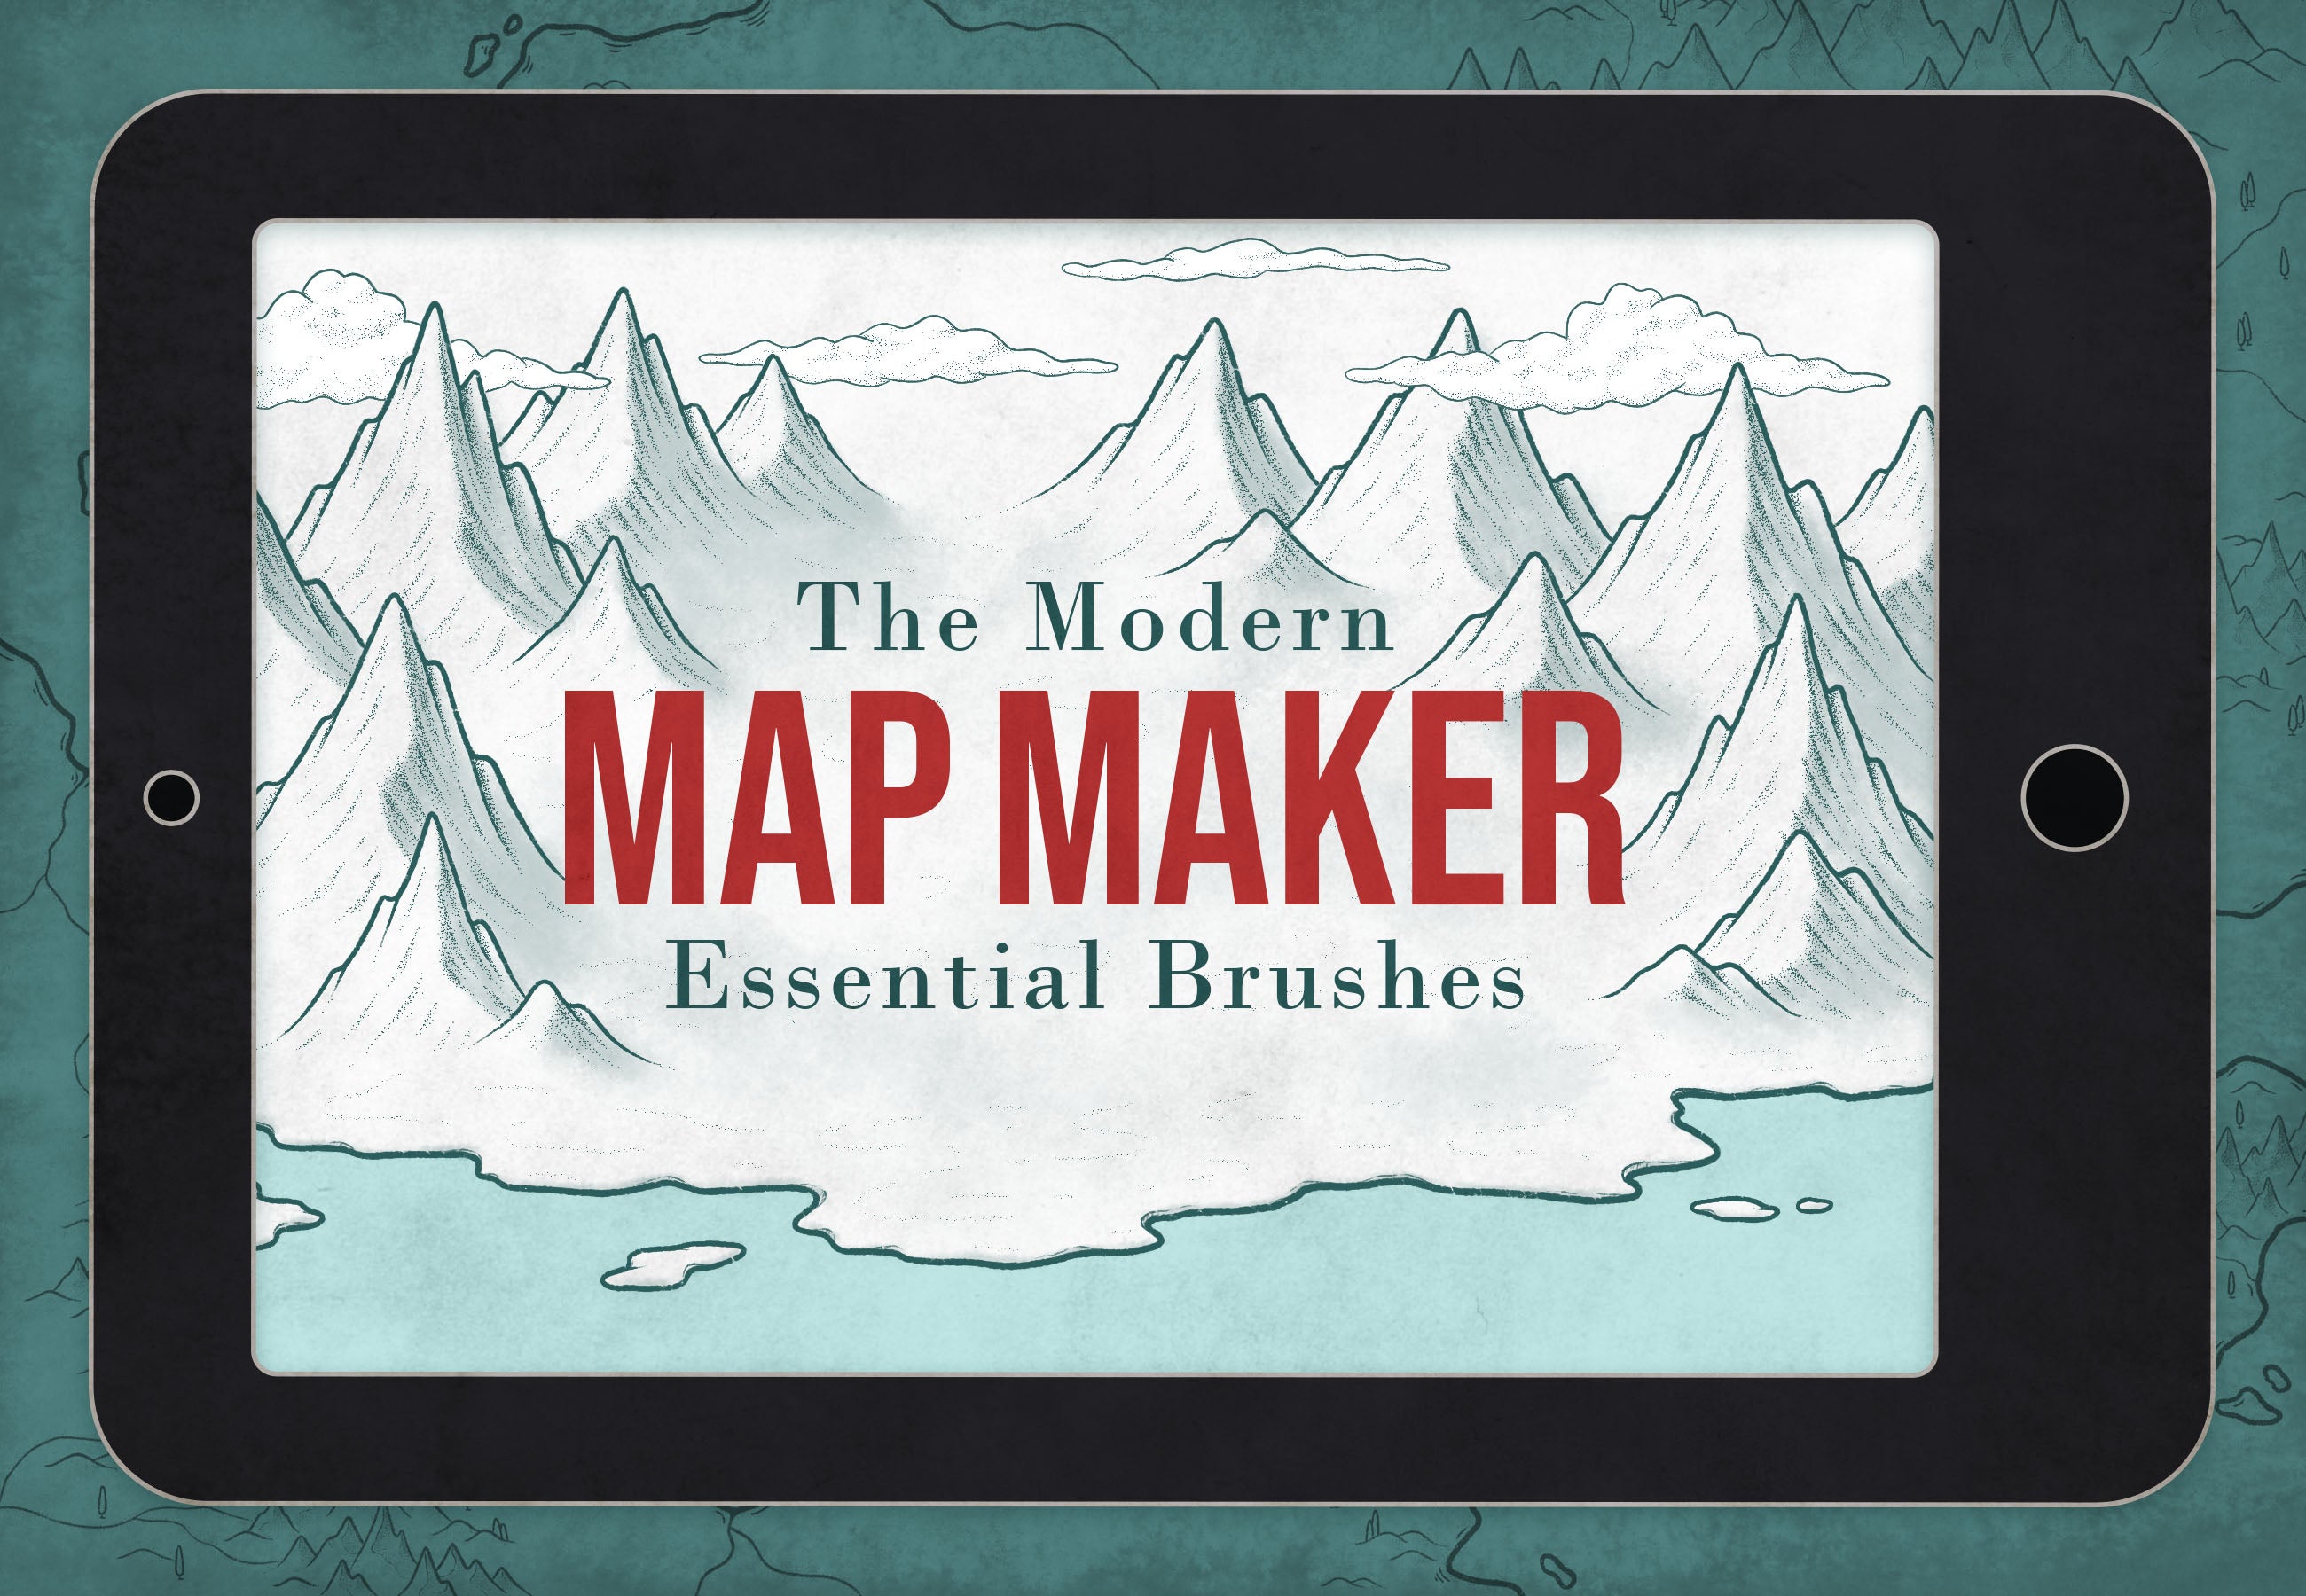 The Modern Map Maker Essential Brushes